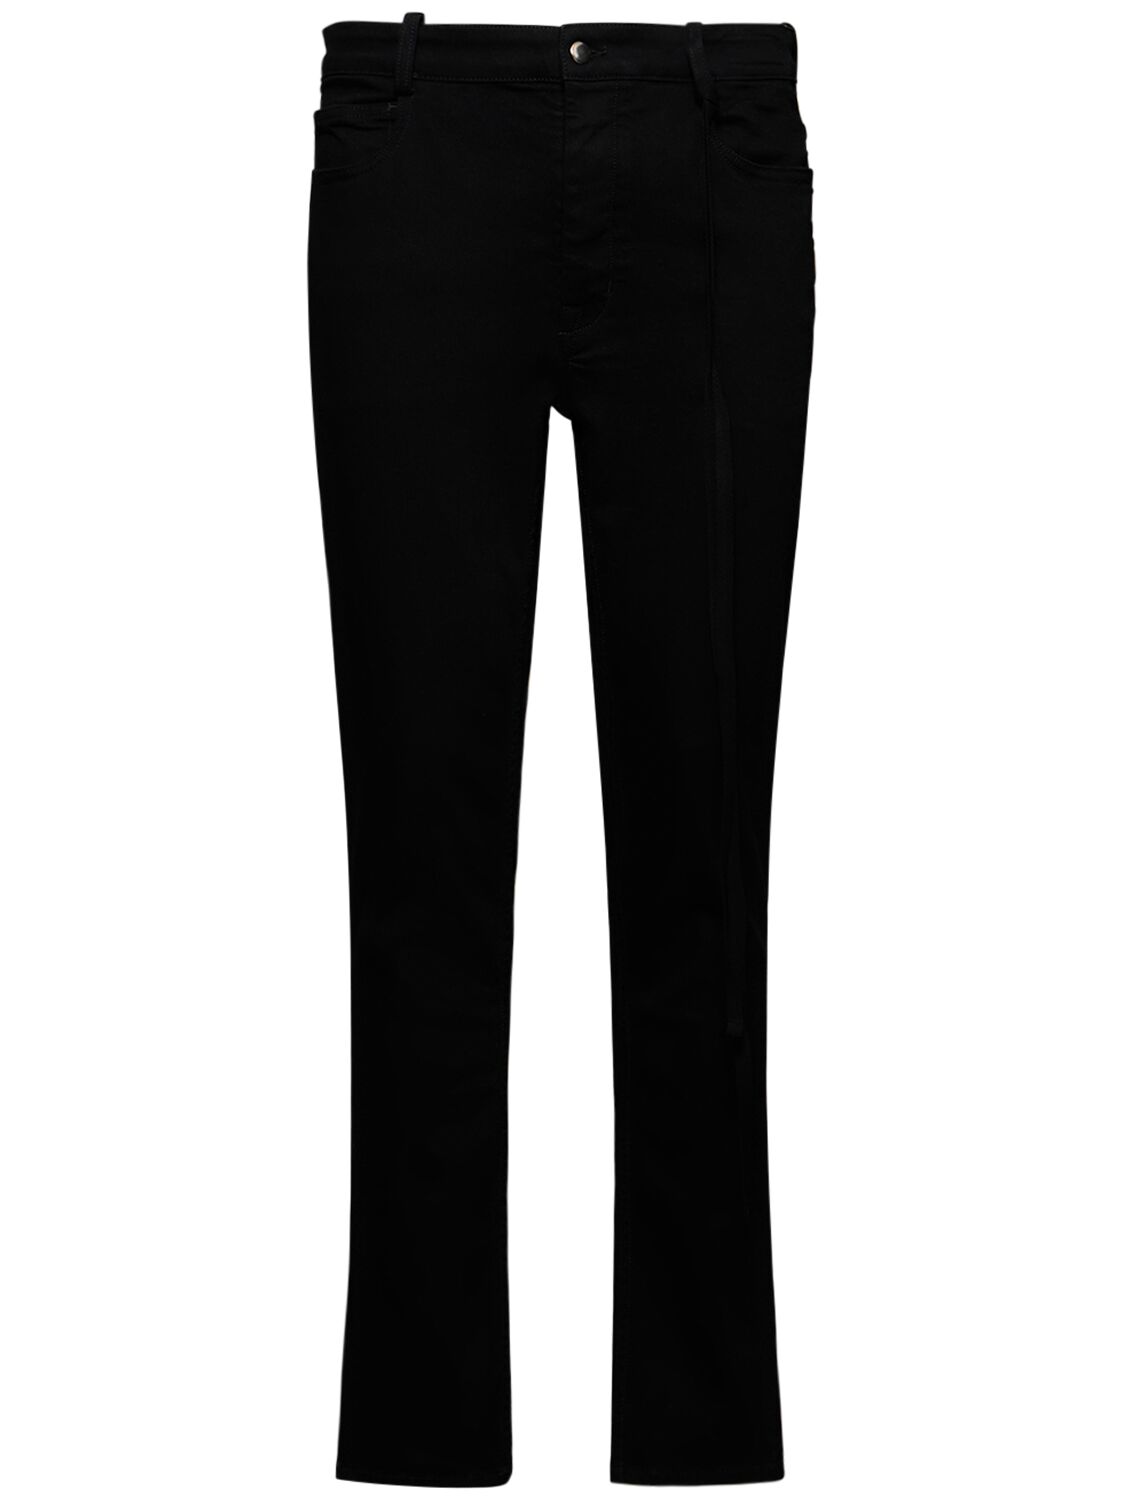 Ann Demeulemeester Wout Cotton Blend Skinny Pants In Black